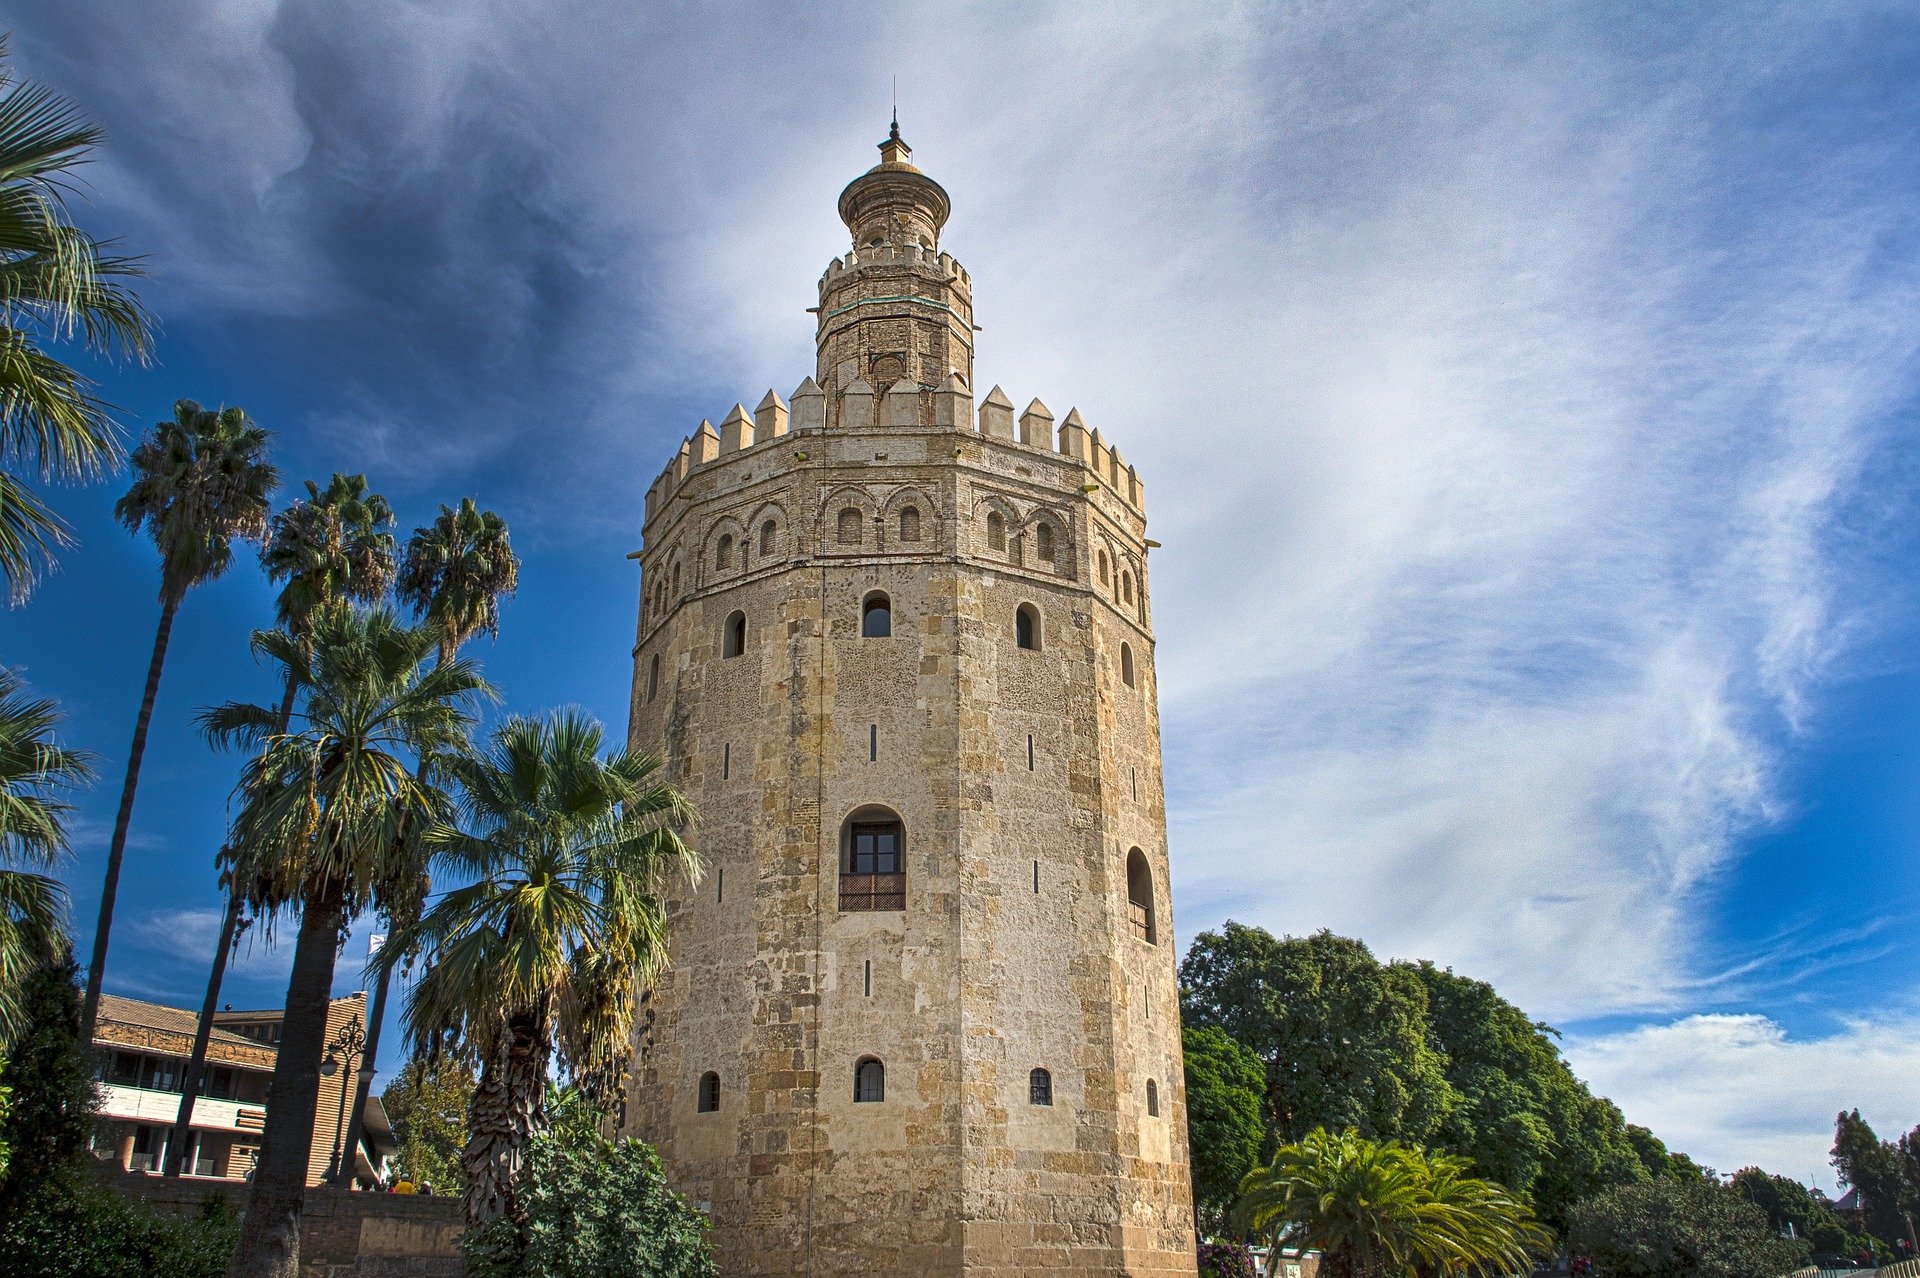 Seville tower at day